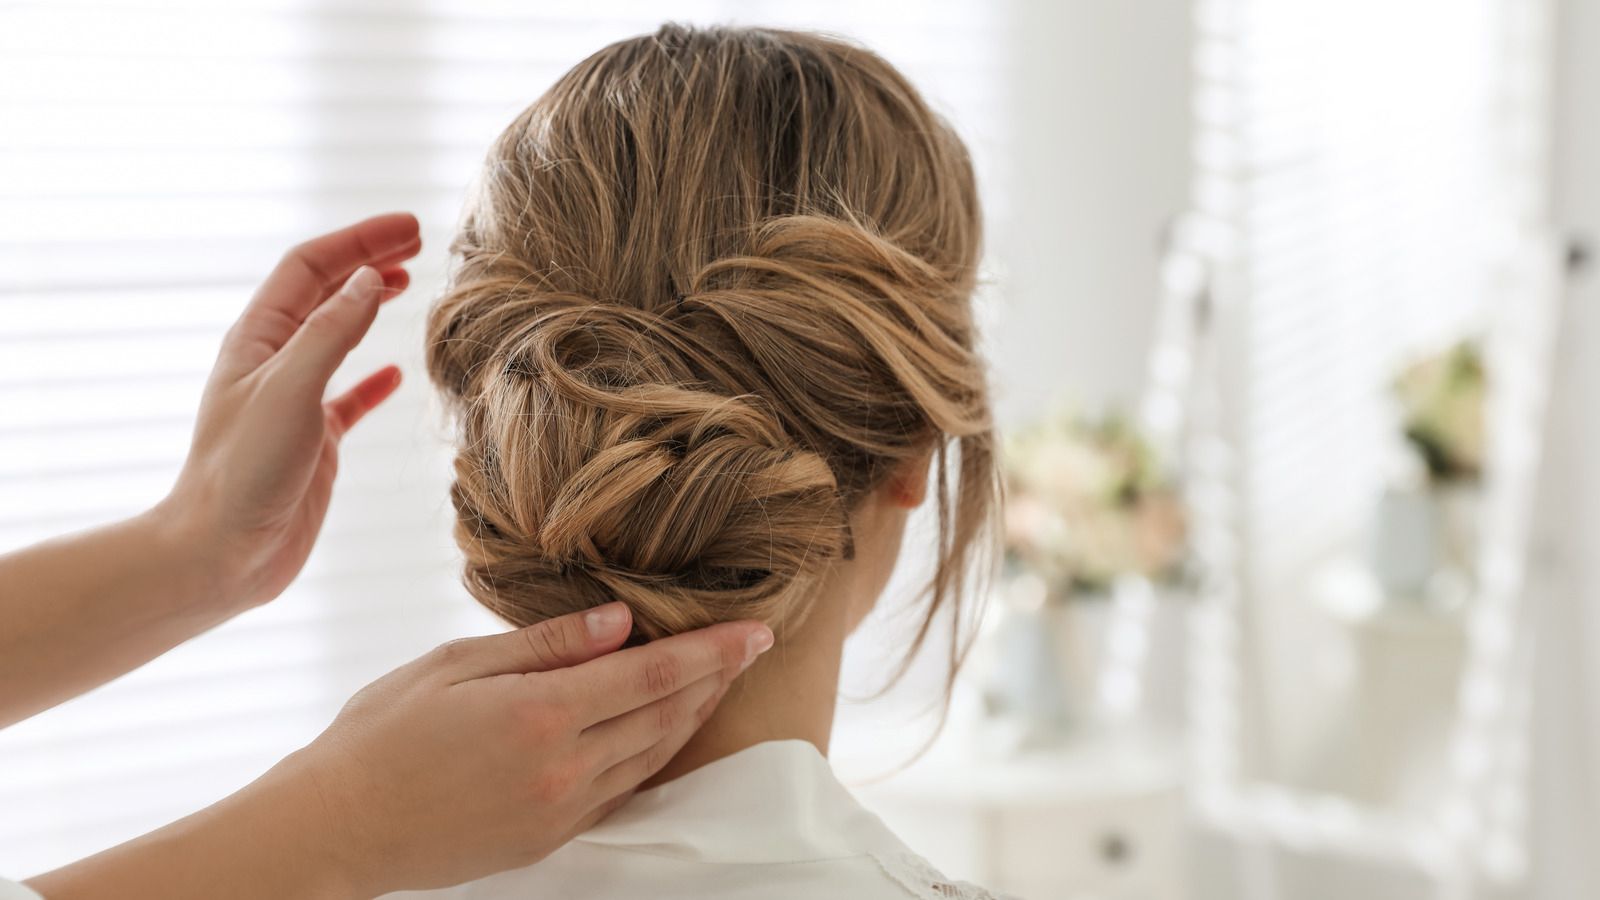 38 Chignon Hairstyles You'll Want To Copy Immediately For Delicate Waves And Massive Chignon (View 10 of 25)